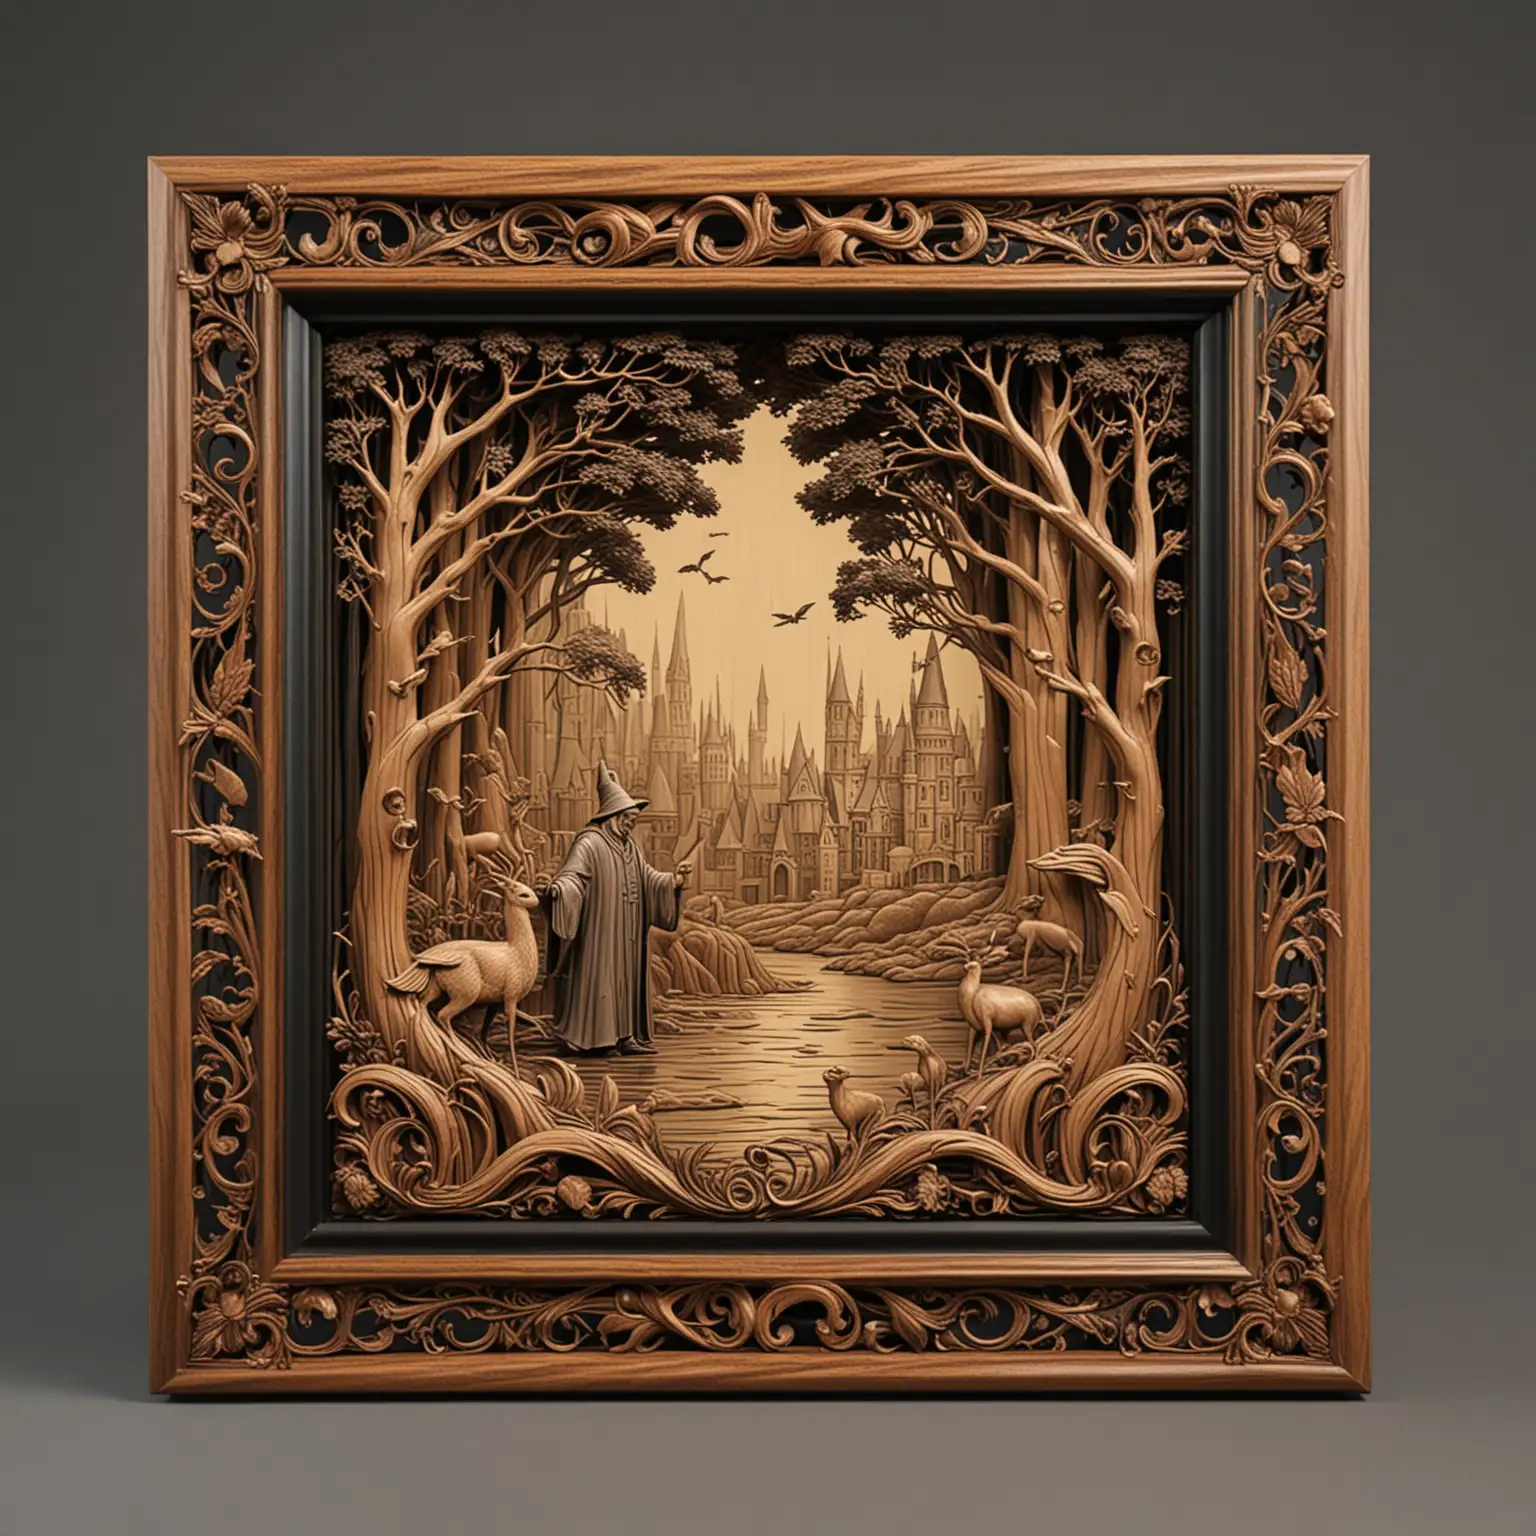 3d and tilable wood lacquer frame surround, featuring a finely carved wooden scene from harry potter 
in the style of aubrey beardsley